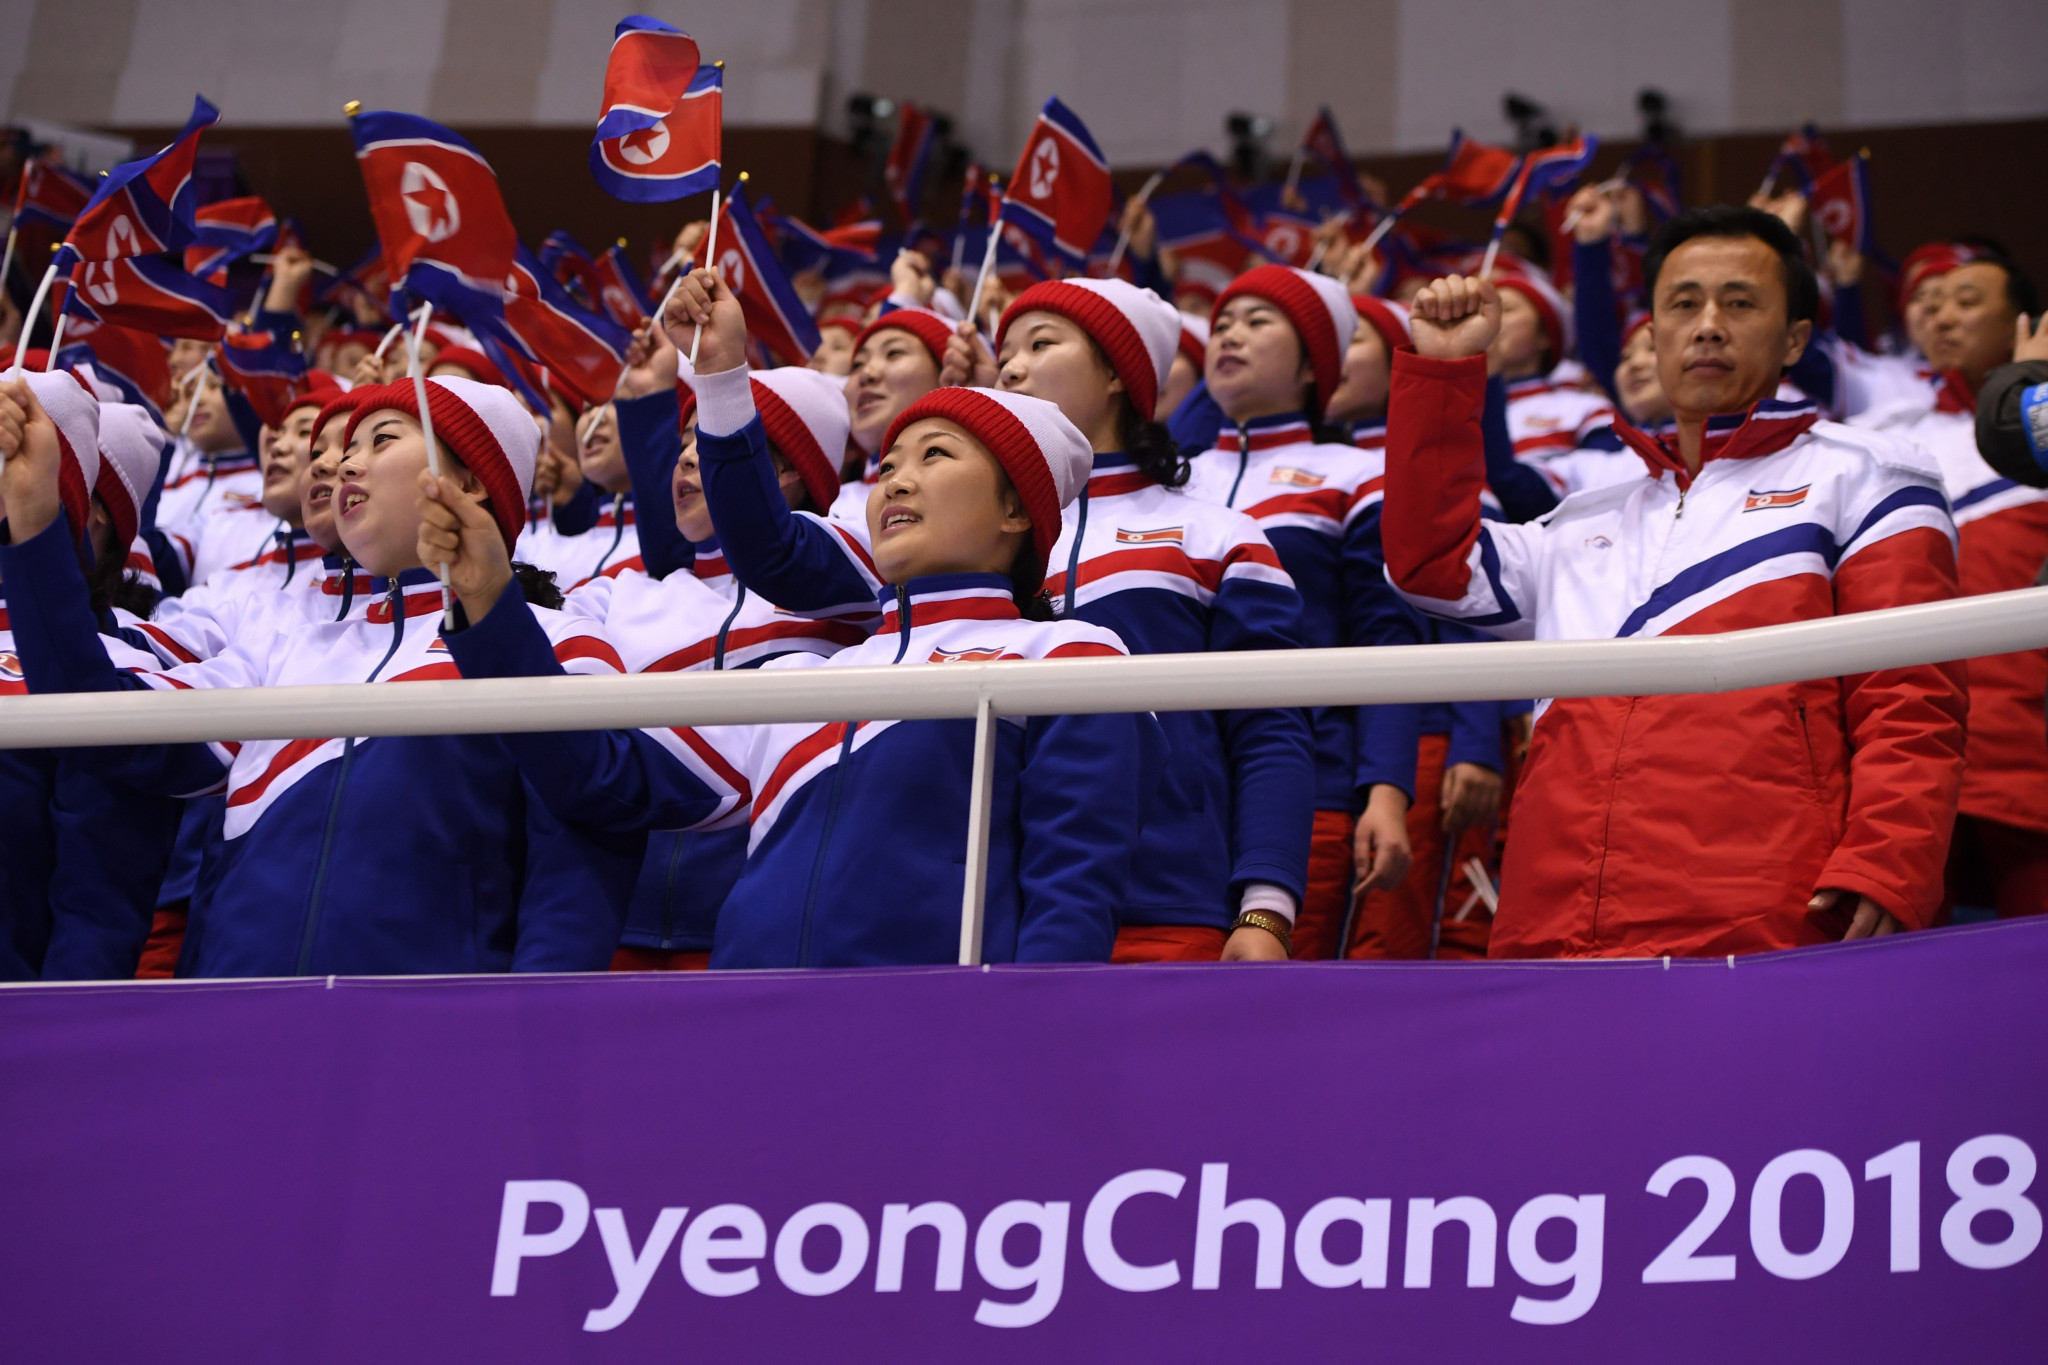 North Korean cheerleaders were again out in force today, this time at figure skating ©Getty Images